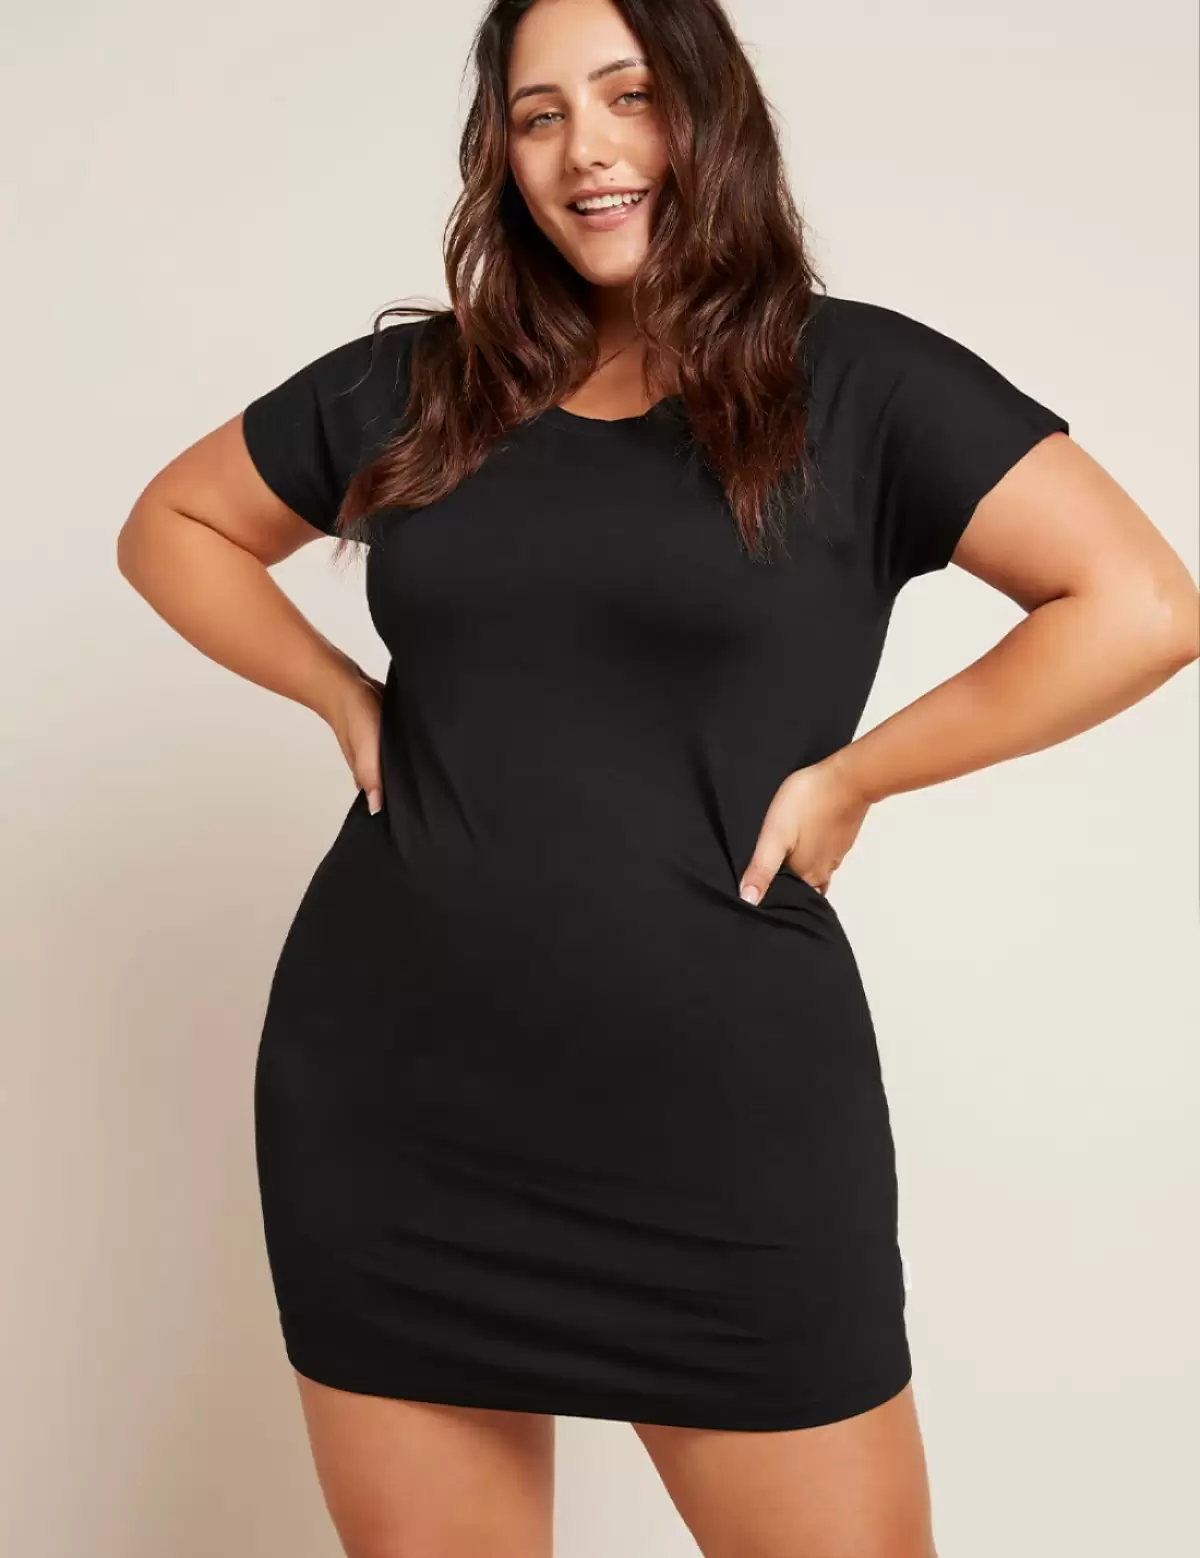 The best plus-size maternity and nursing wear 2021